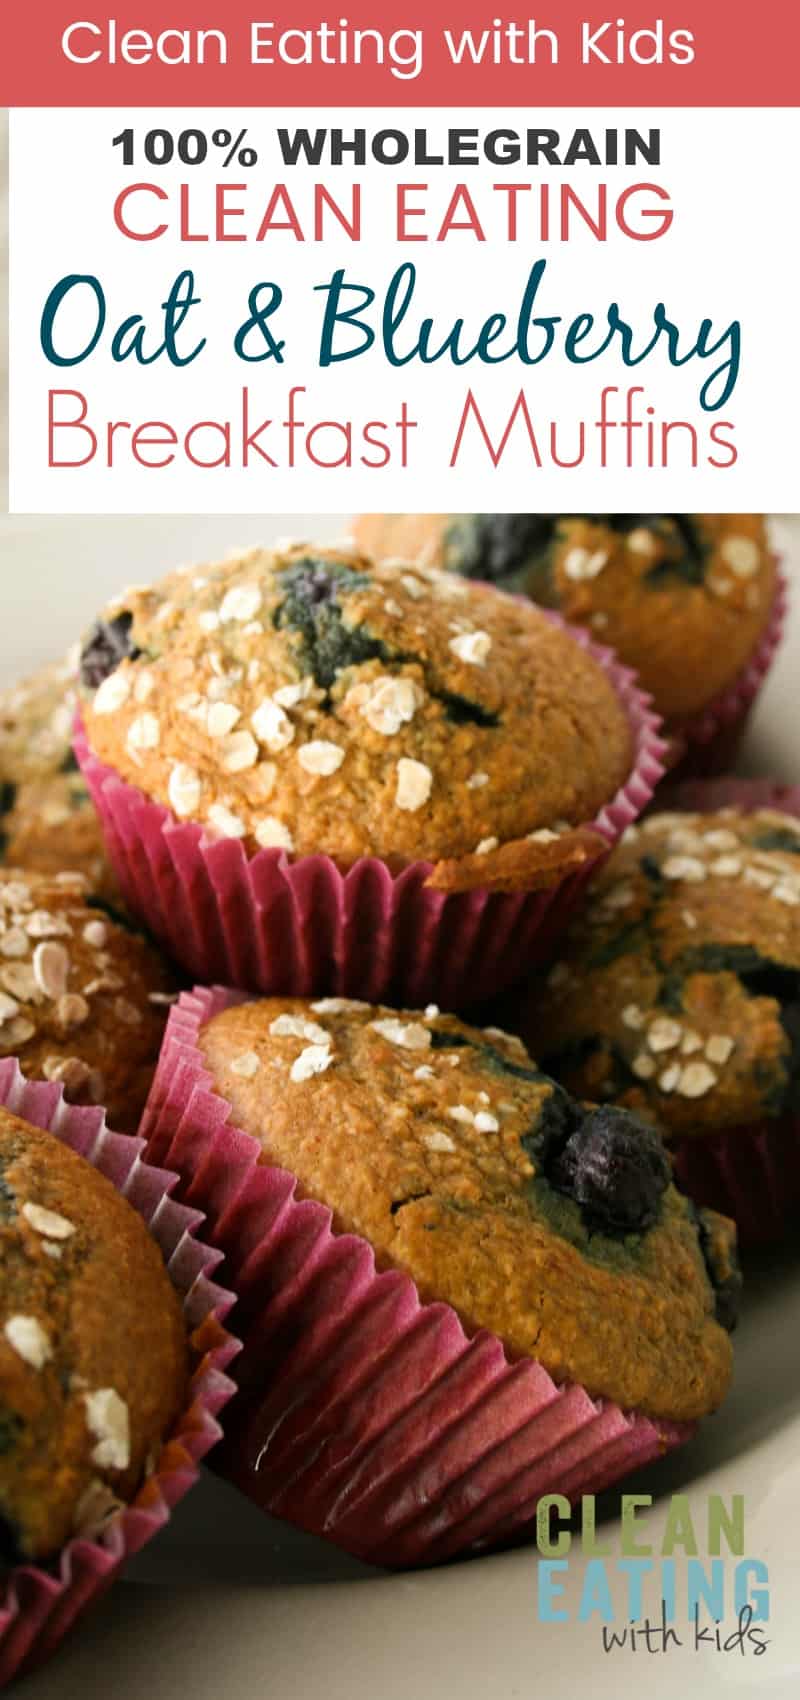 Clean Eating Breakfast Recipe. 100% Whole grain oat and blueberry muffins.